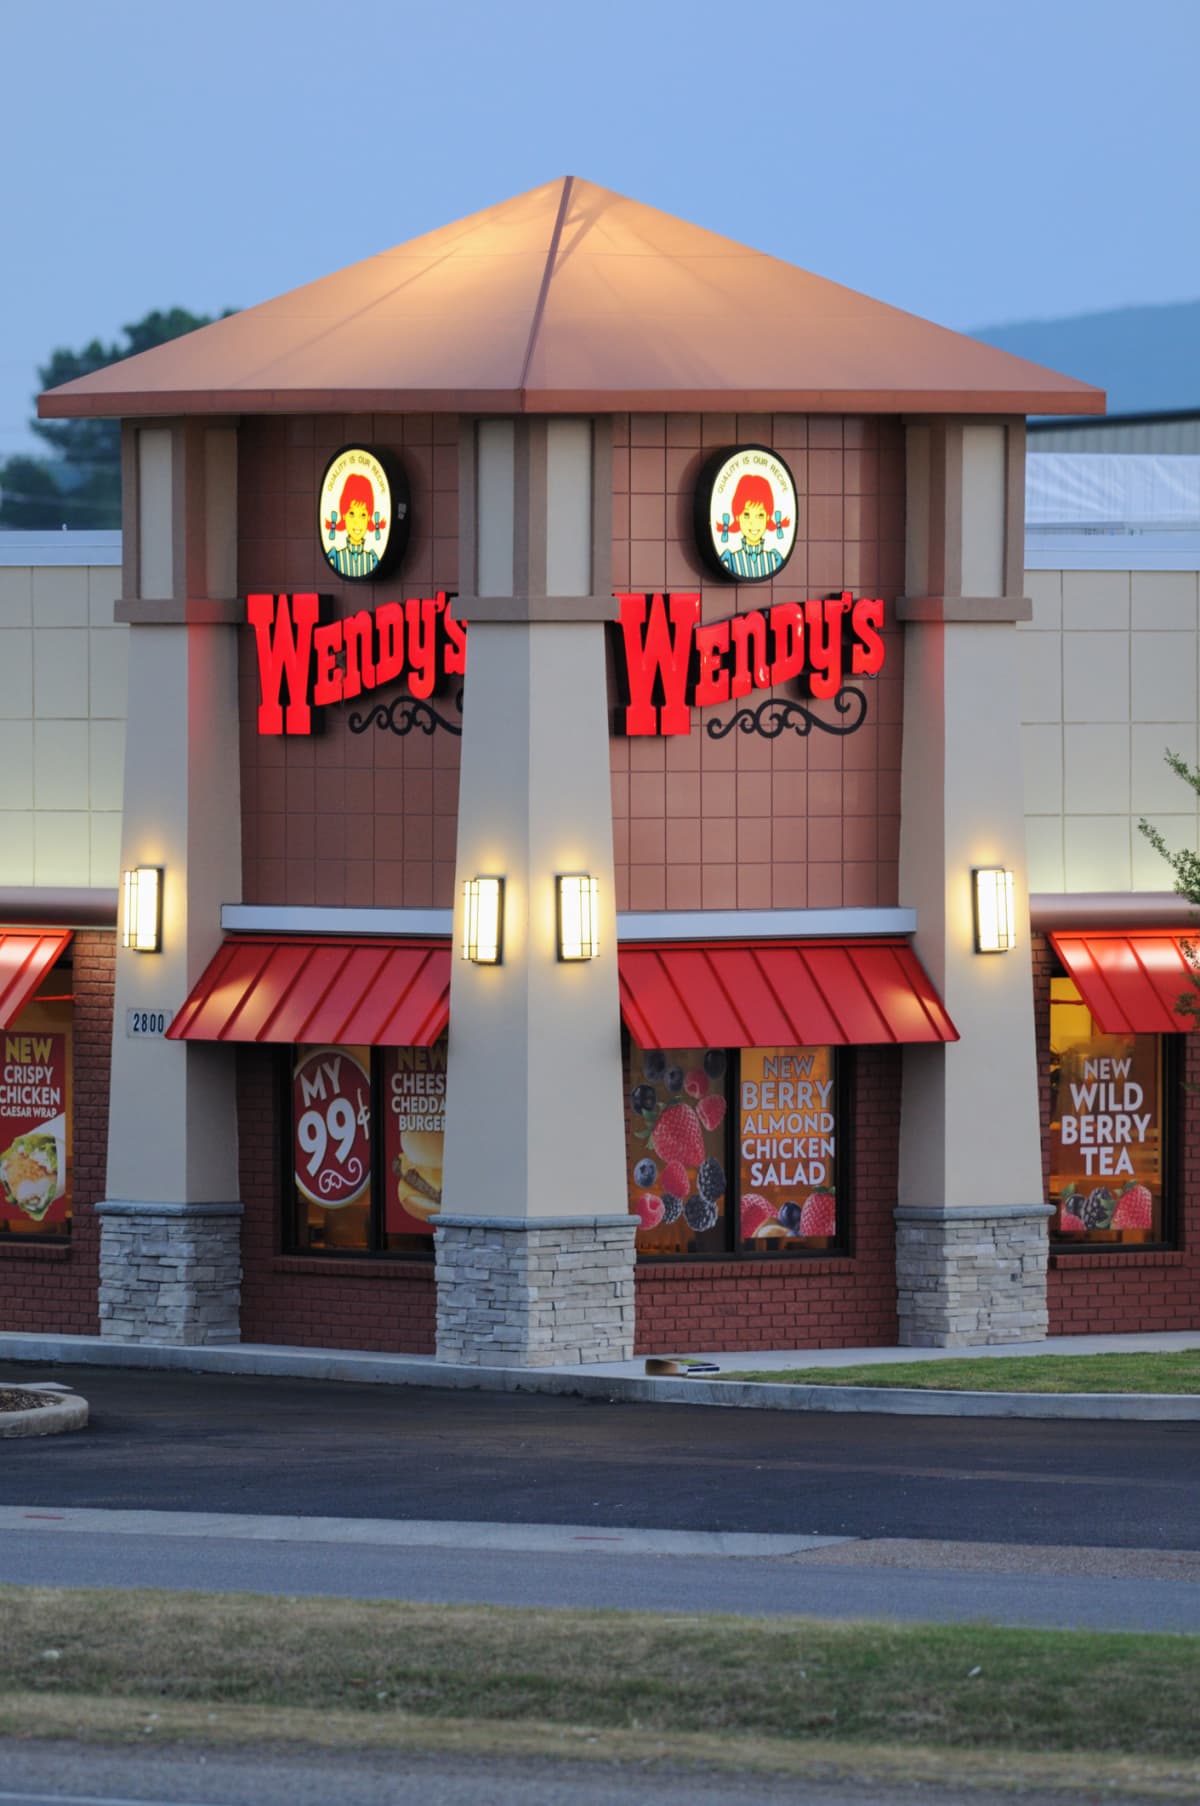 A Wendy's restaurant in the evening